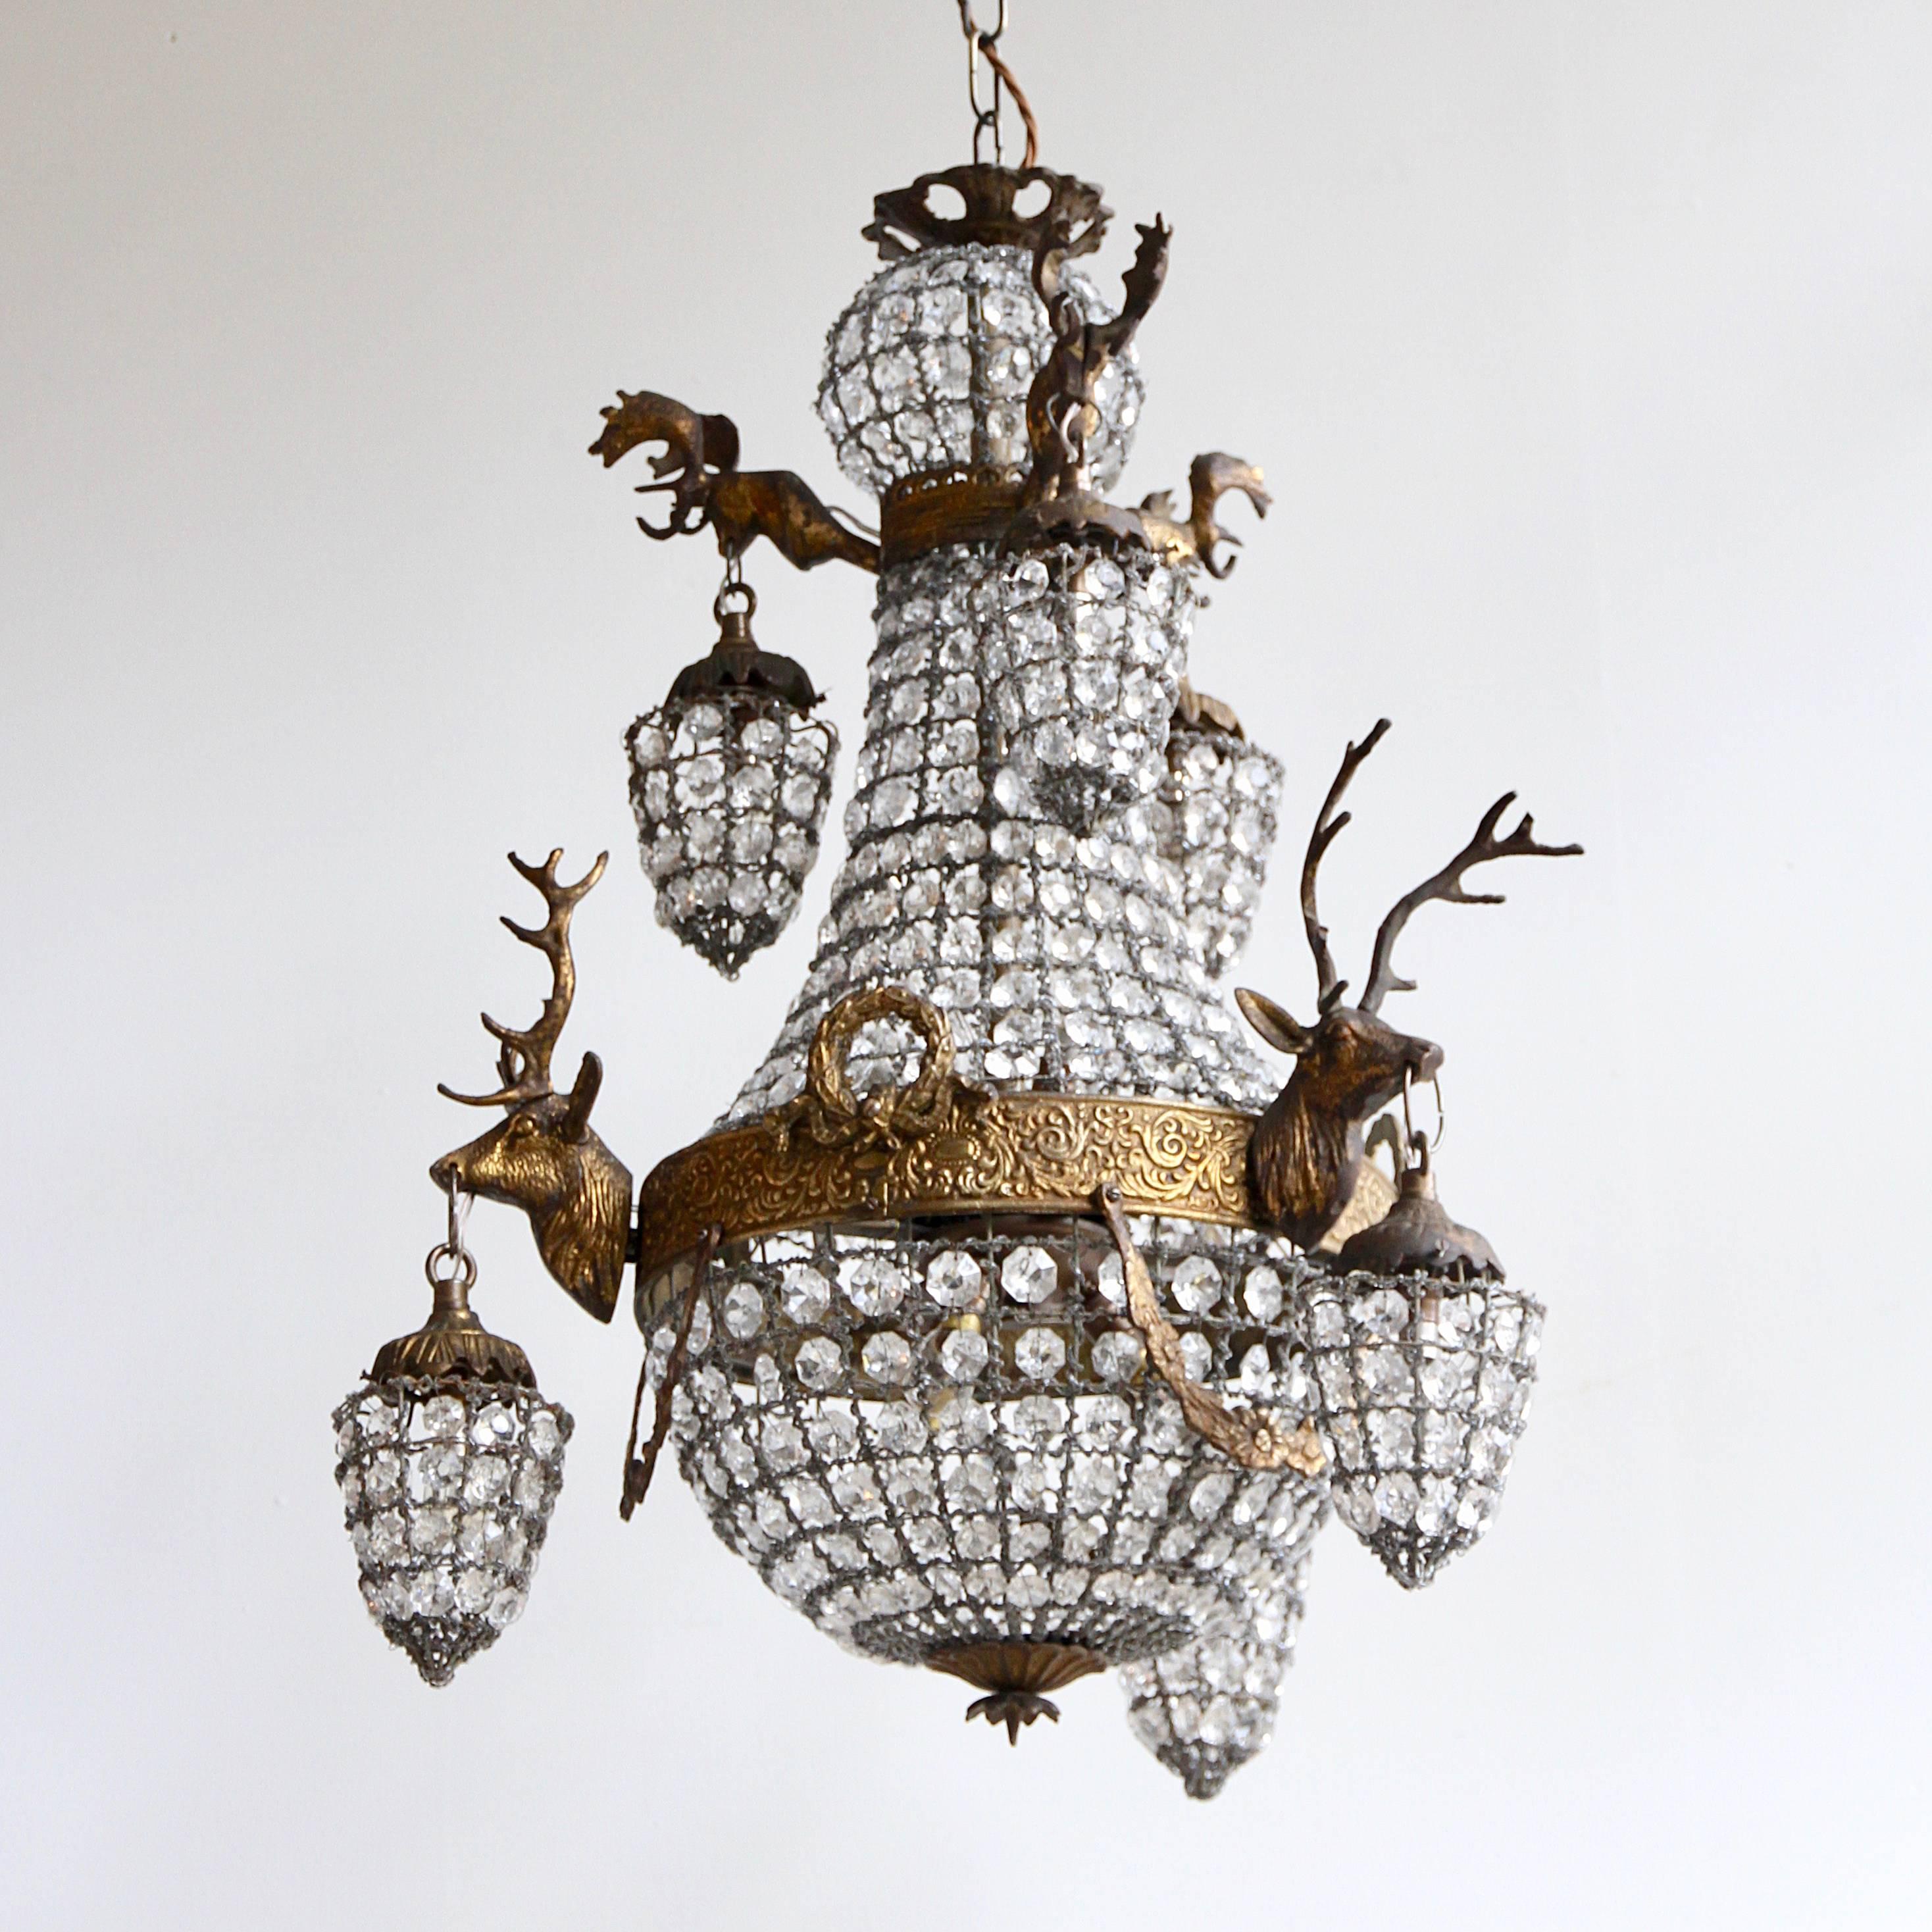 Early 1900s French Empire balloon chandelier with stags head sconces. Parts of the glass encrusted mesh have been restored and replaced. Chandelier has six hidden inner lamps and six outer lanterns all containing a single lamp. Supplied with chain